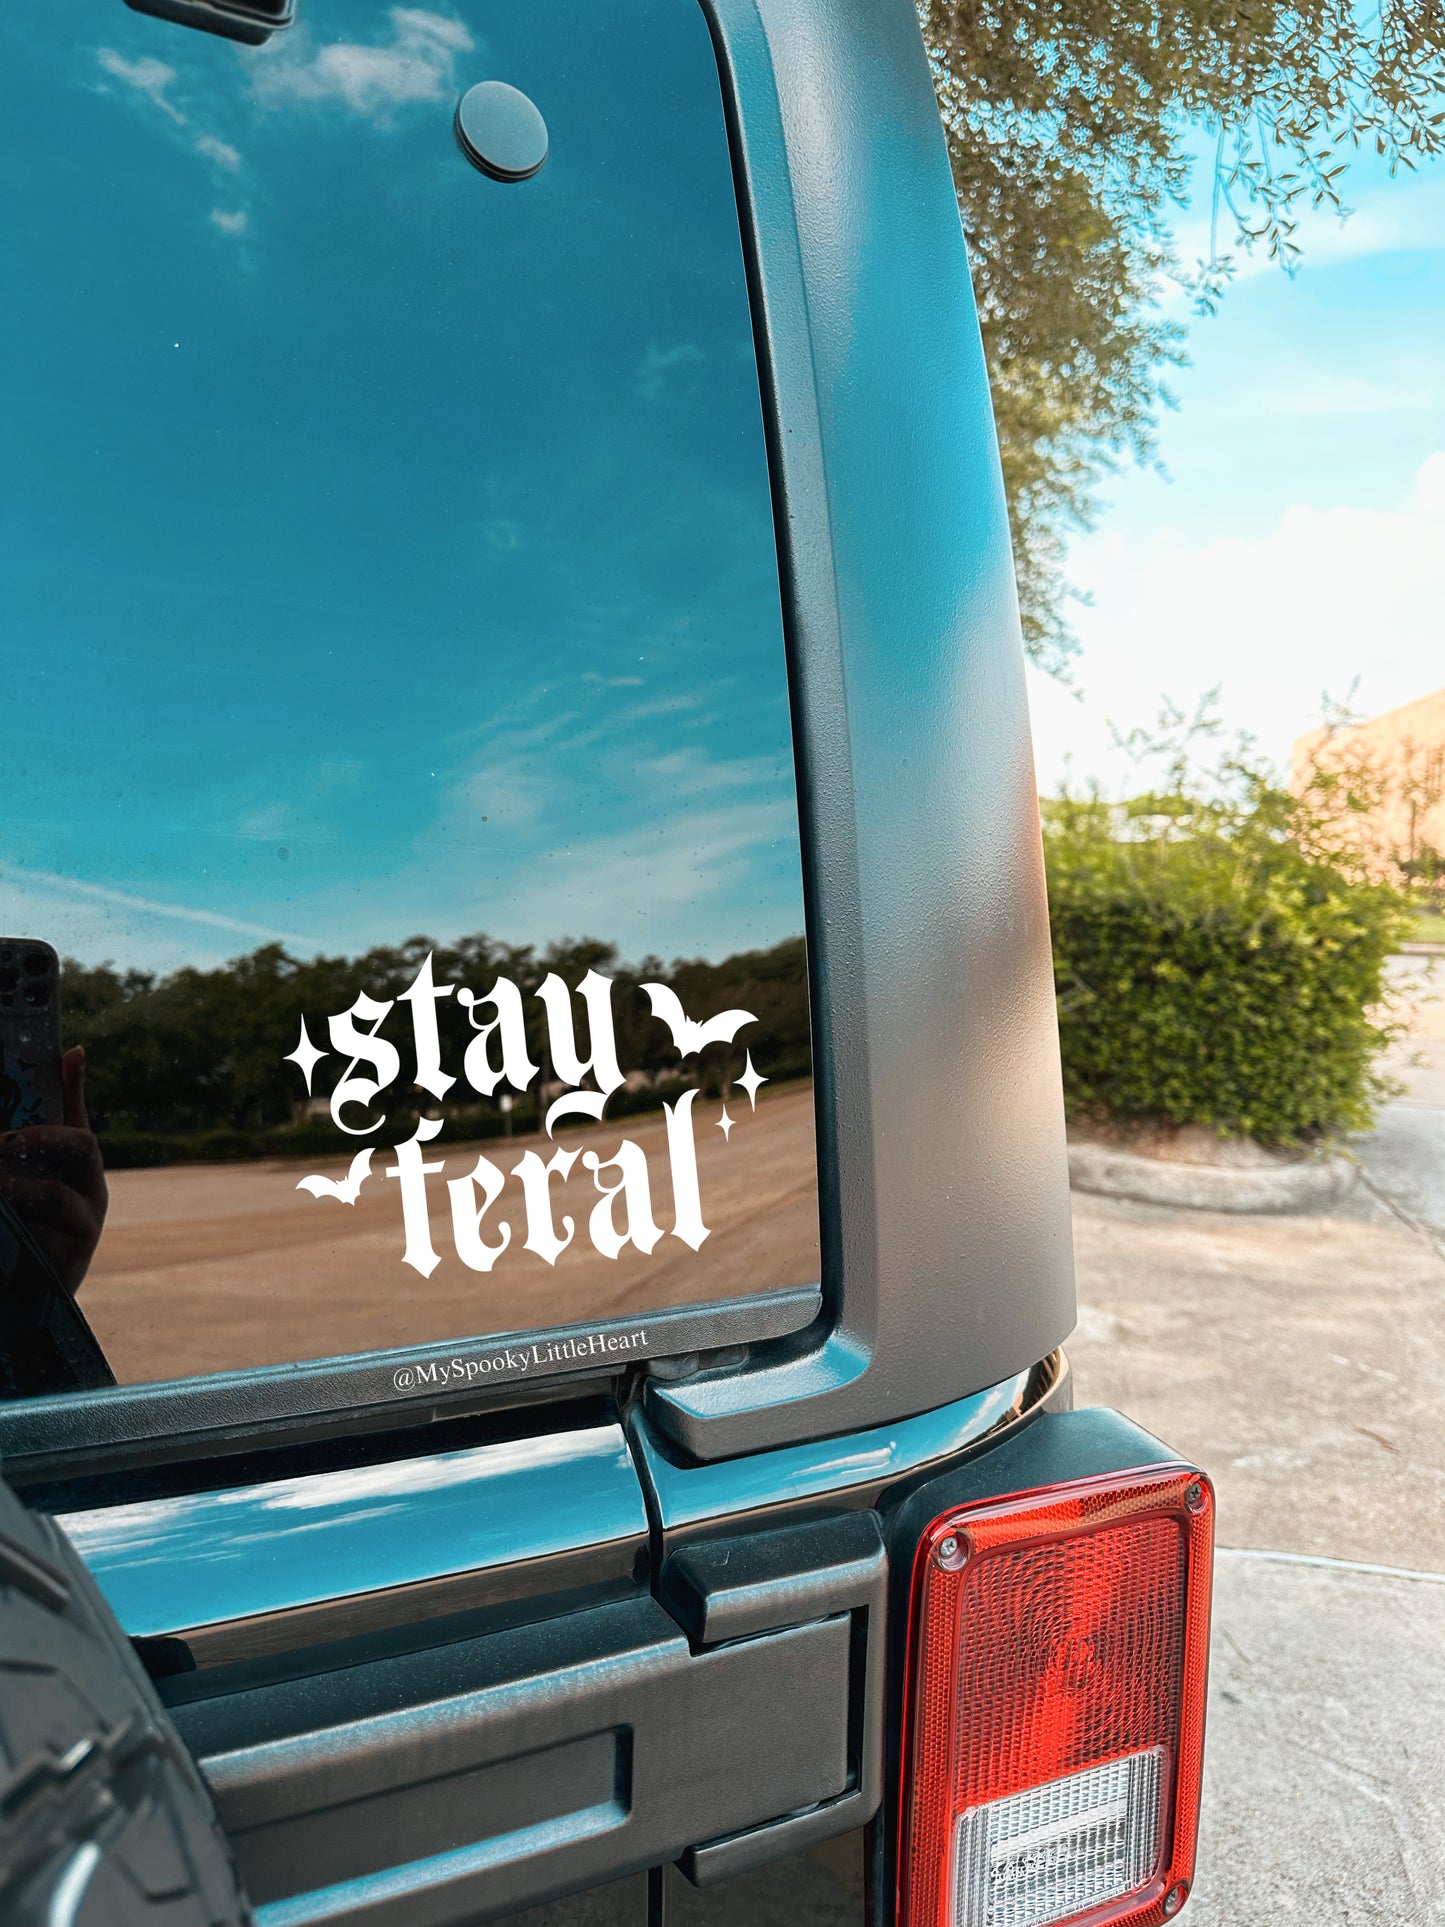 Stay Feral with Bats Vinyl Decal